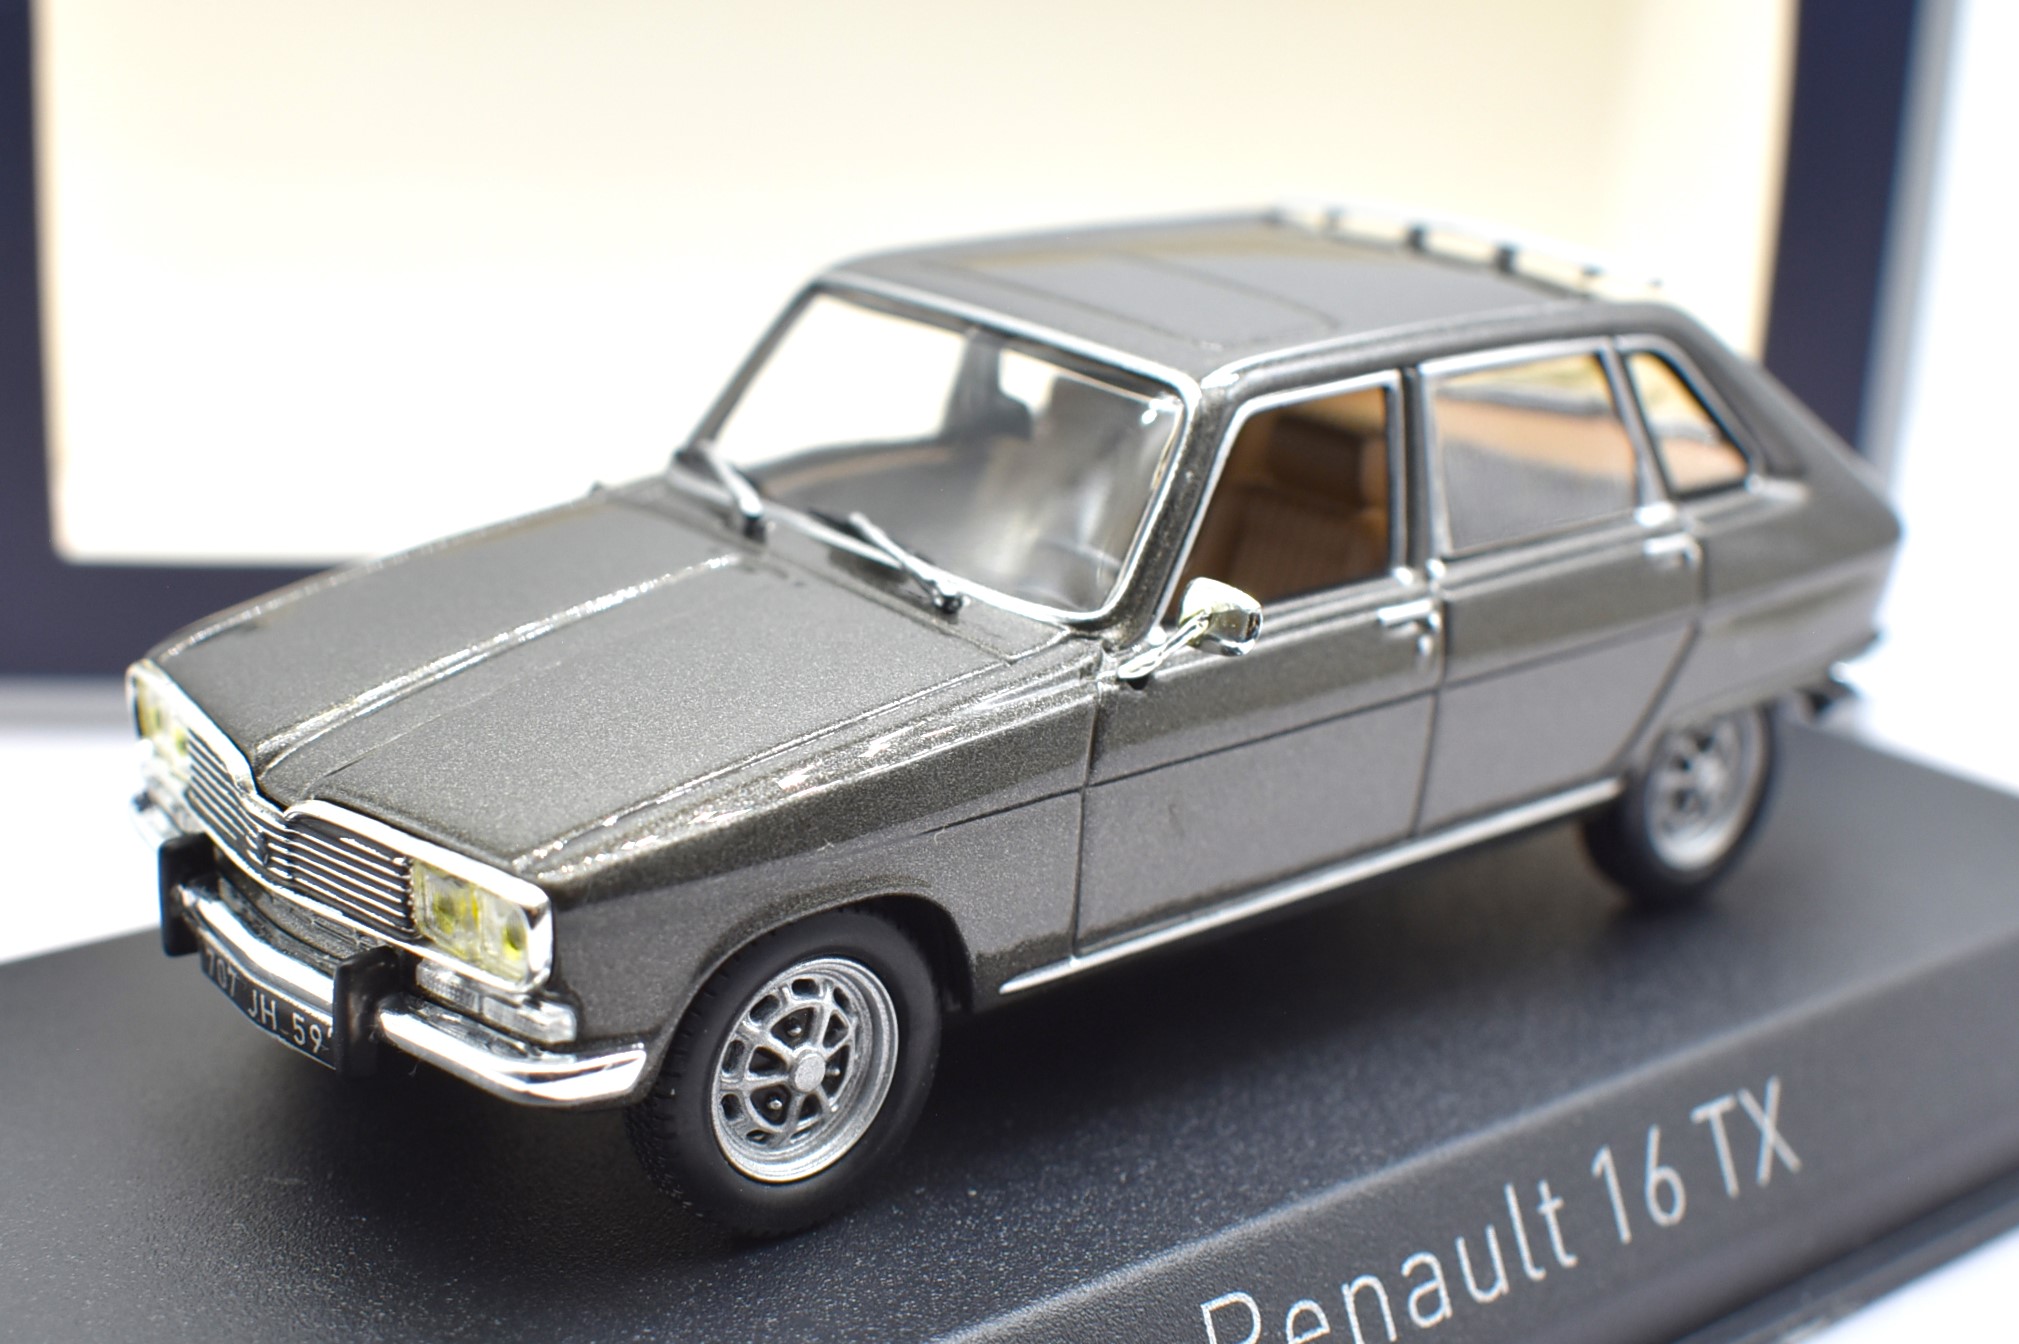 Model car 1:43 scale Renault 16 TX Norev diecast vehiclescollection